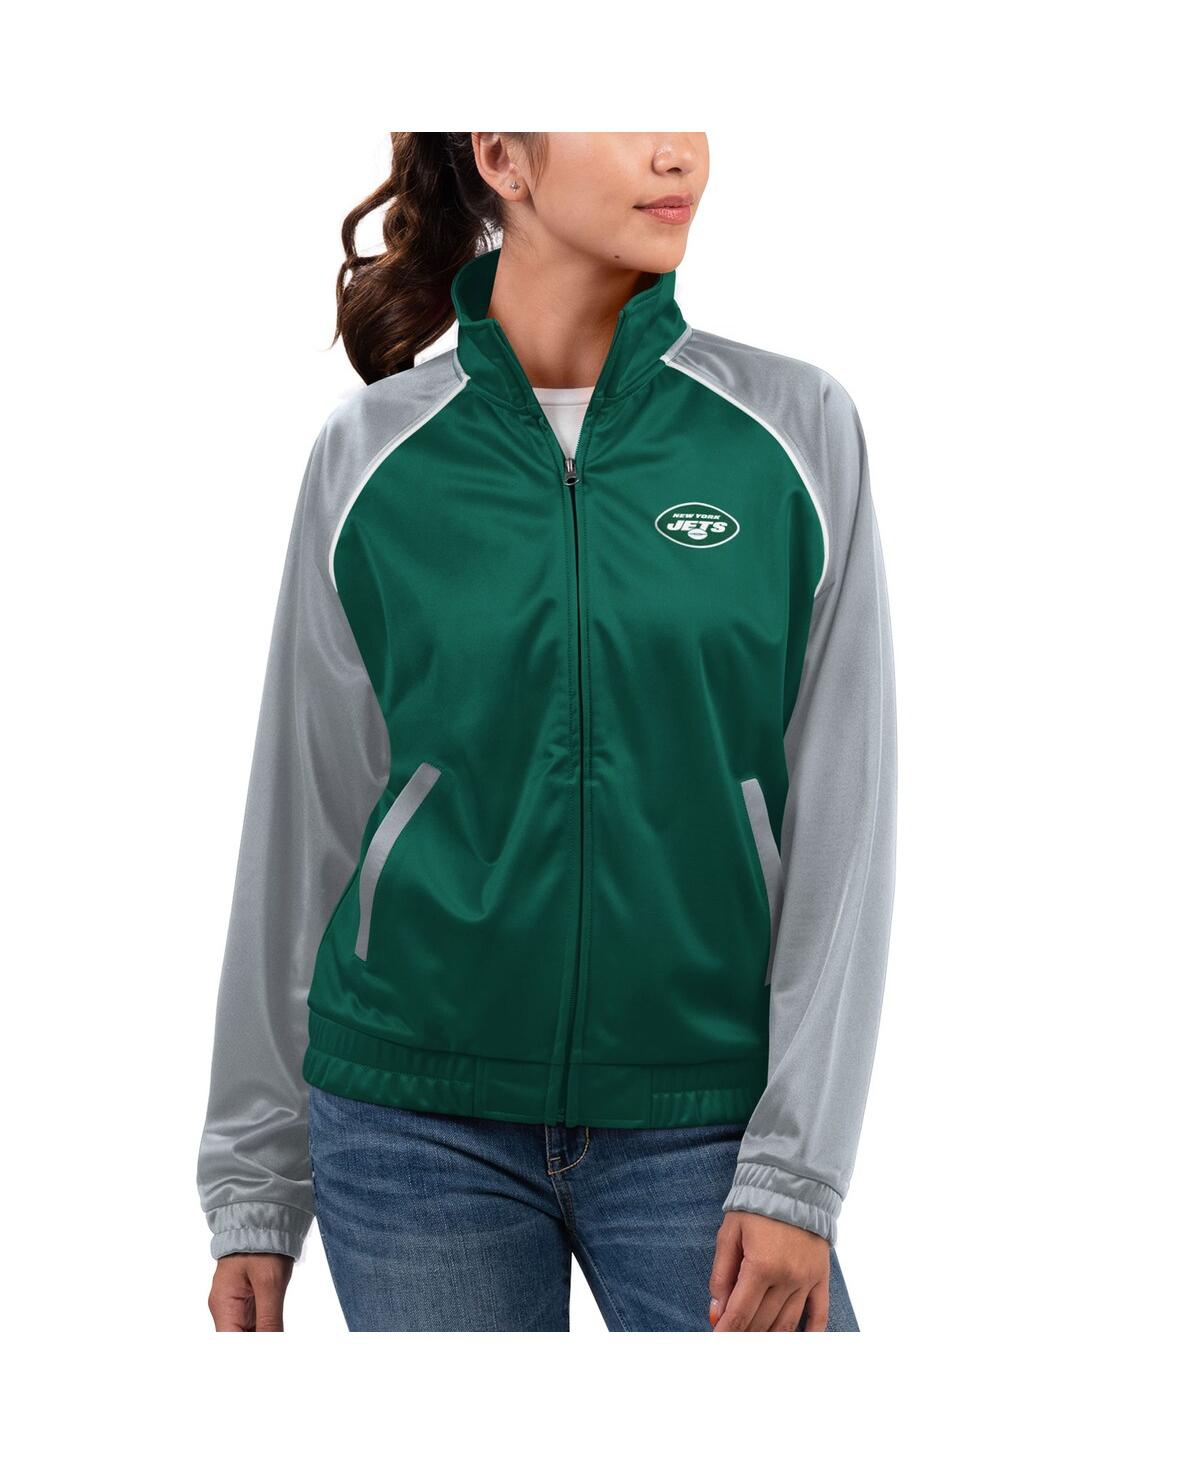 Women's G-iii 4Her by Carl Banks Green New York Jets Showup Fashion Dolman Full-Zip Track Jacket - Green